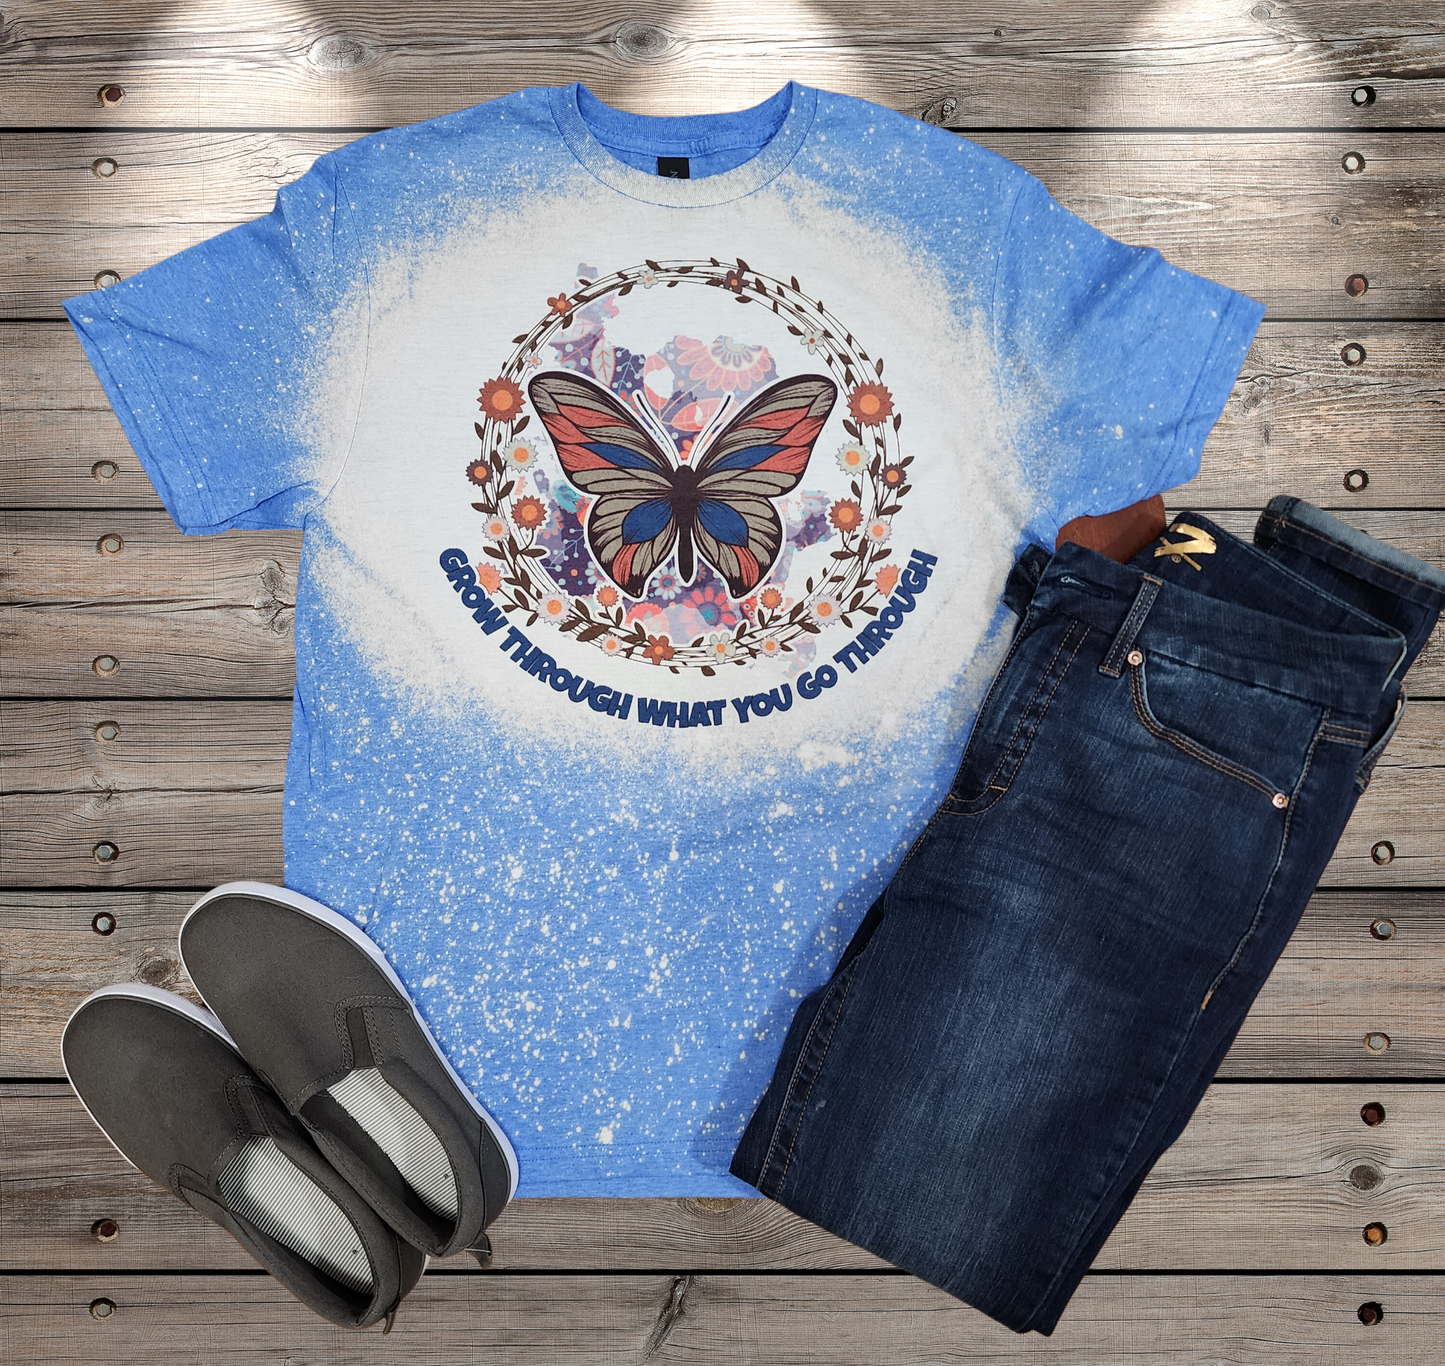 Bleached sublimated TShirt  Grow through what you go through